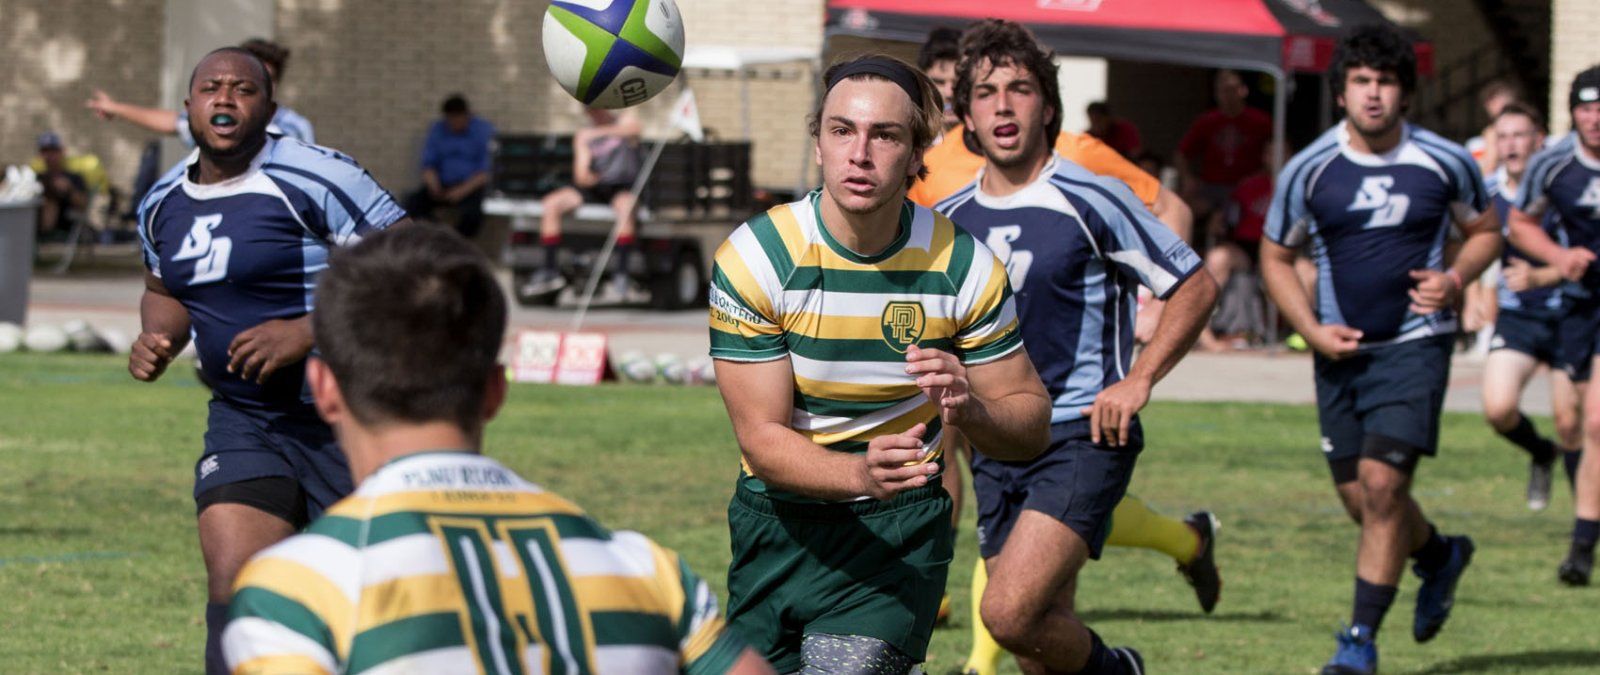 69's rugby team competes against the University of San Diego in a local tournament.